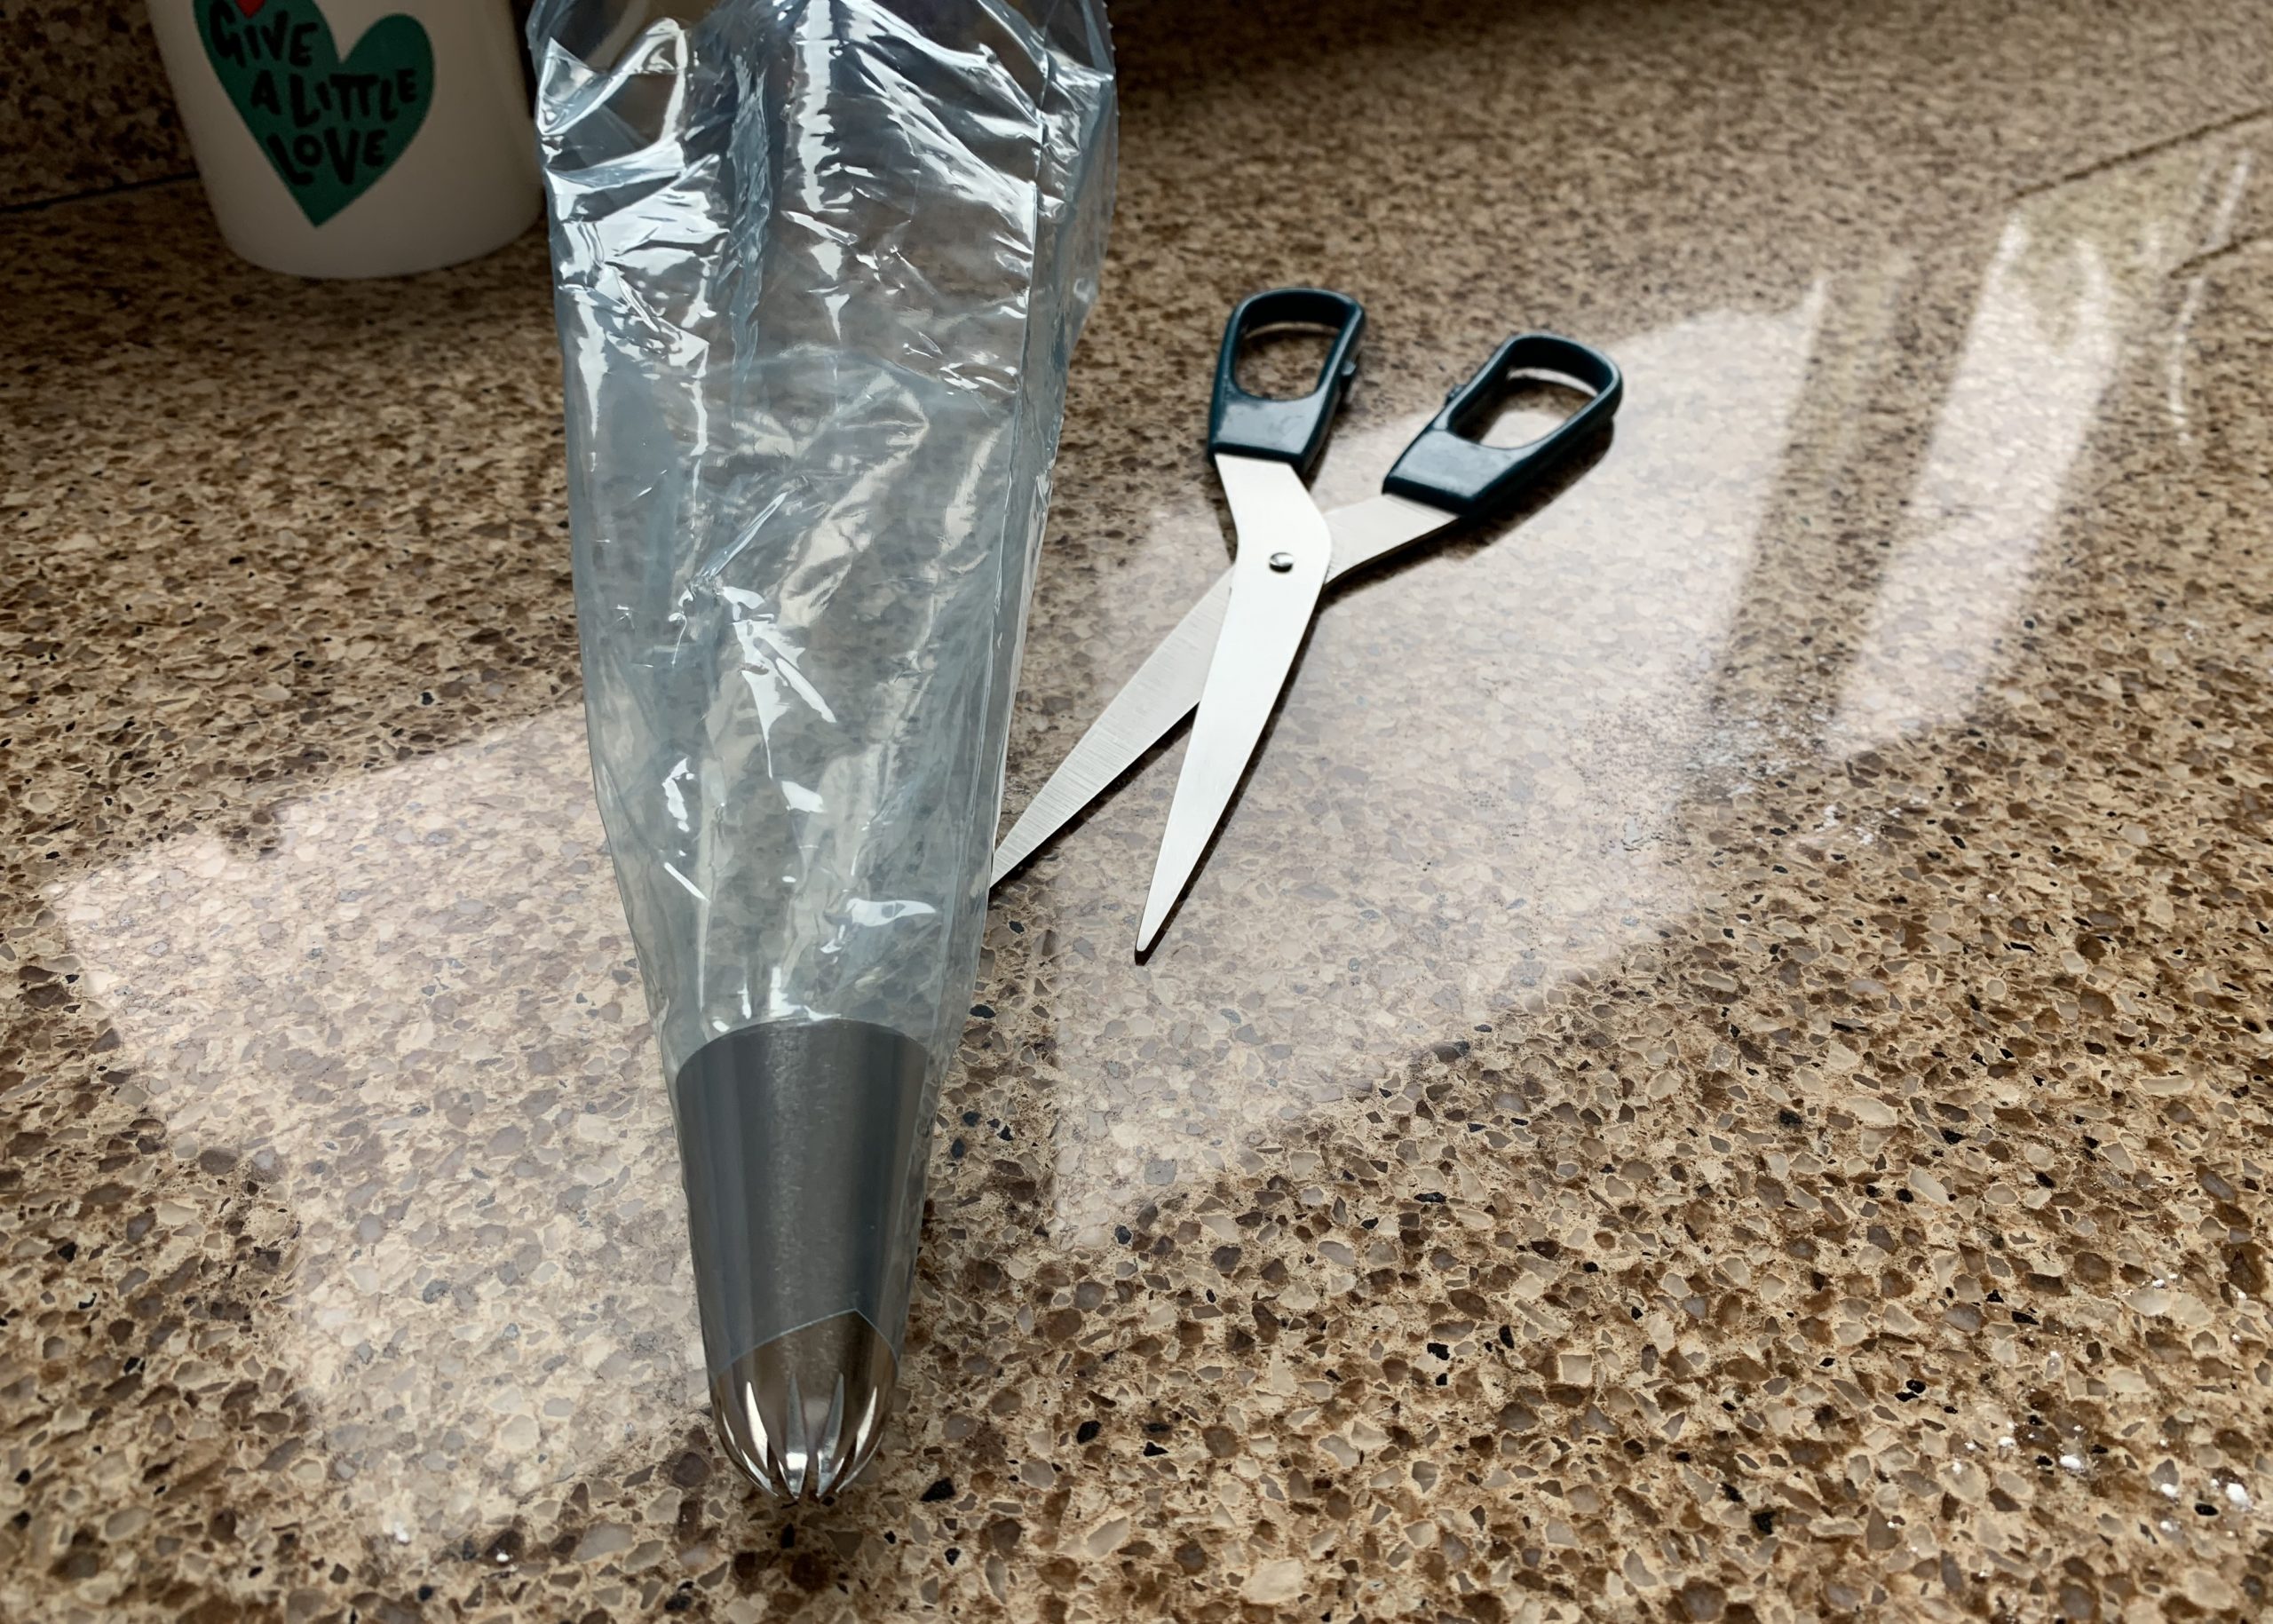 Piping bag and scissors